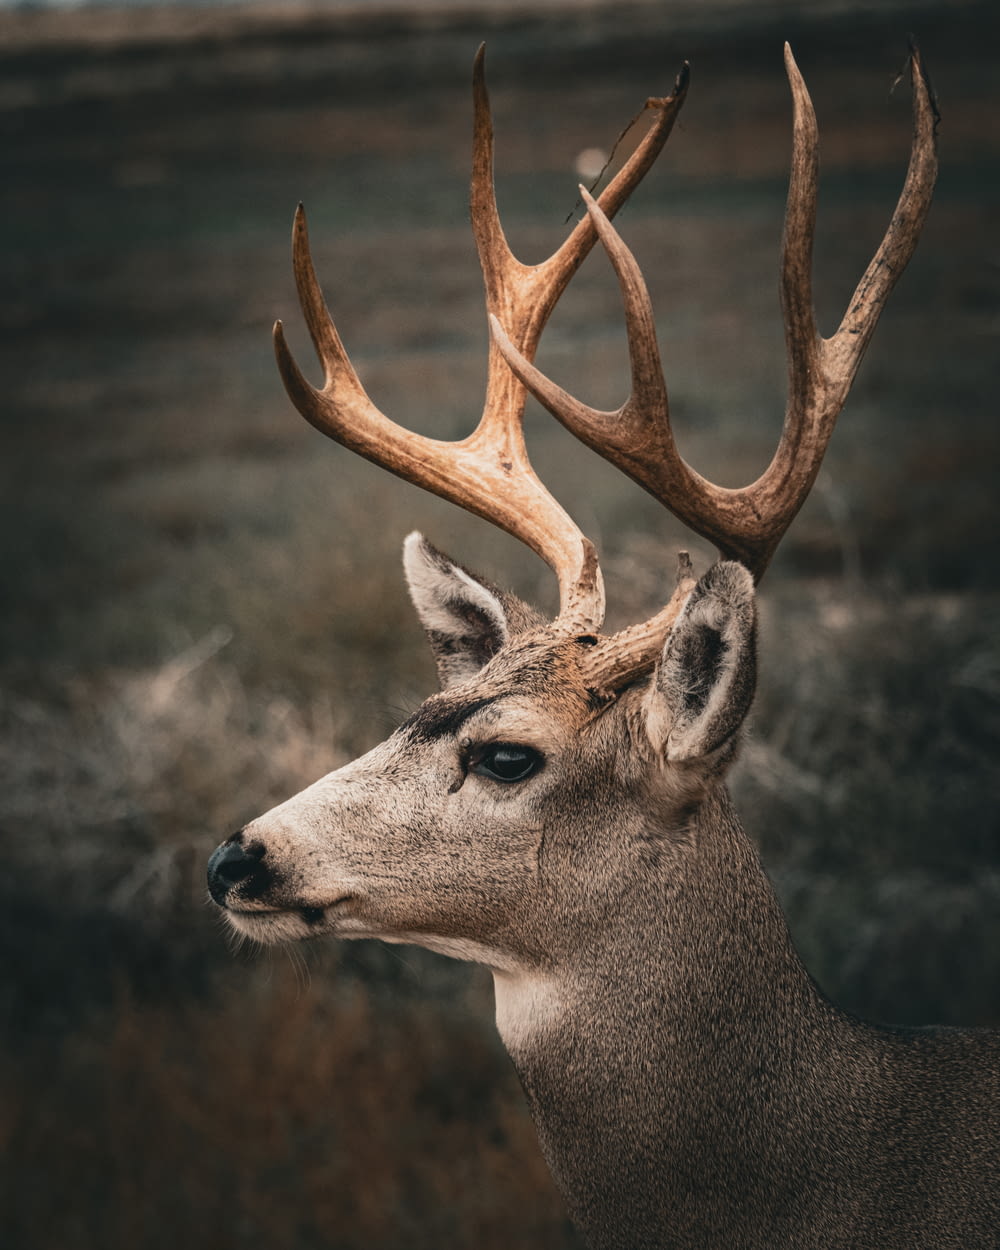 a close up of a deer's head with antlers